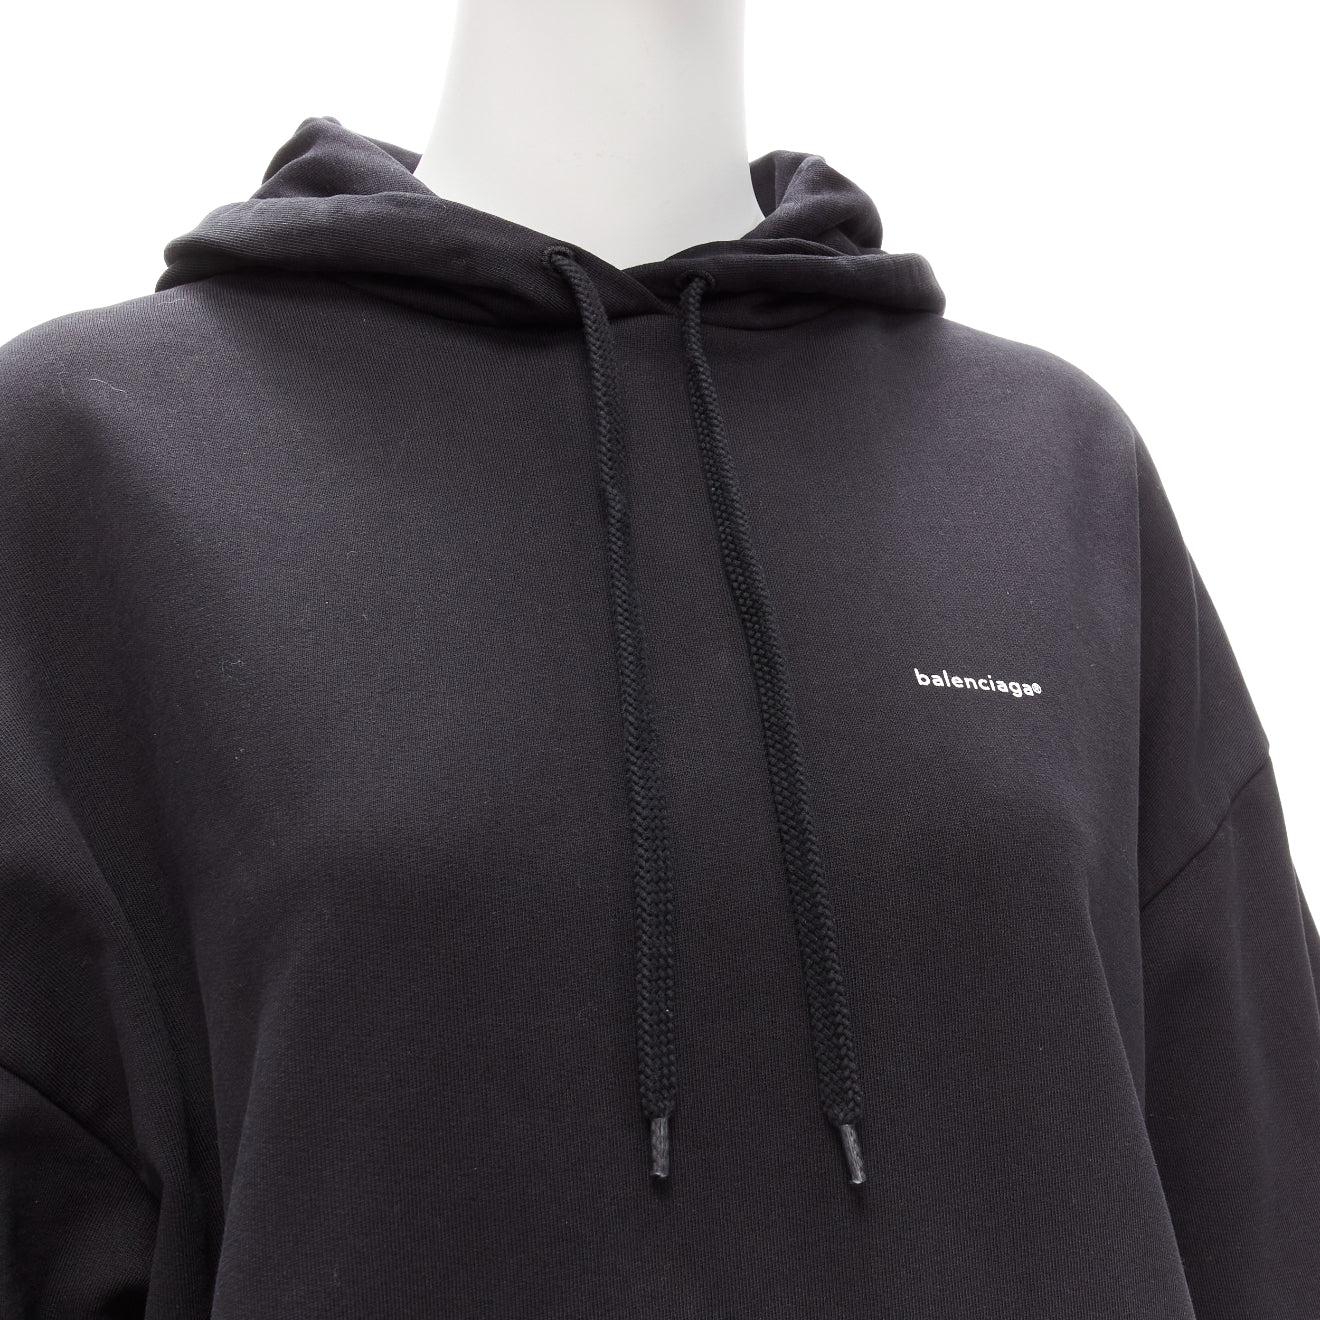 BALENCIAGA 2017 Archetype black cotton logo oversized hoodie XS
Reference: LNKO/A02247
Brand: Balenciaga
Designer: Demna
Model: Archetype
Collection: FW 2017
Material: Cotton
Color: Black
Pattern: Solid
Closure: Pullover
Made in: